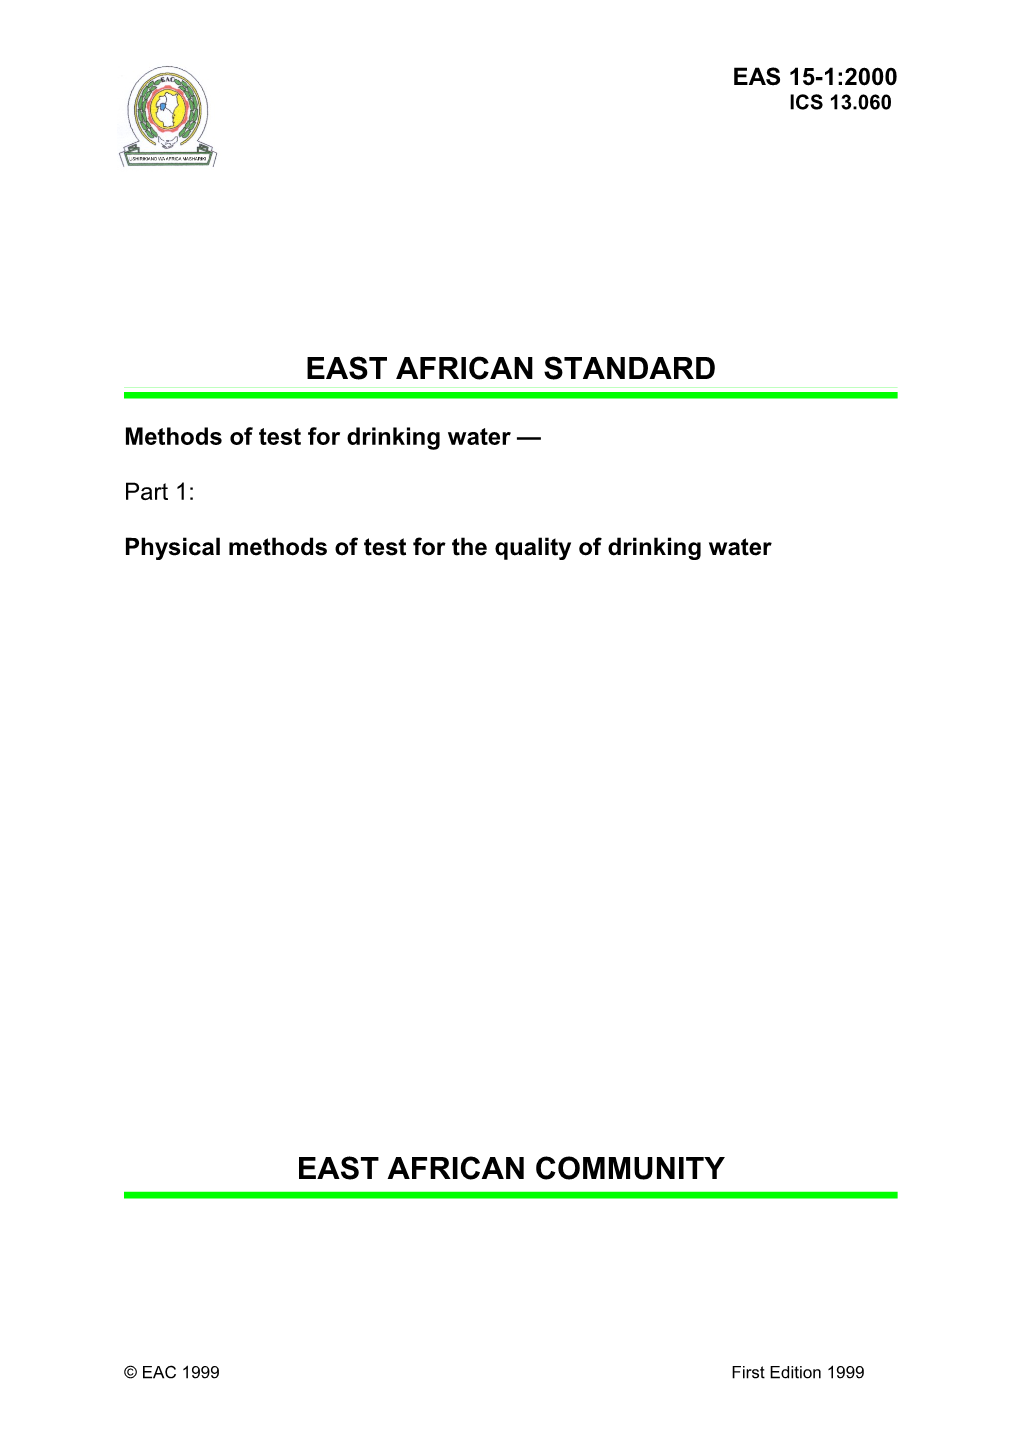 Physical Methods of Test for the Quality of Drinking Water